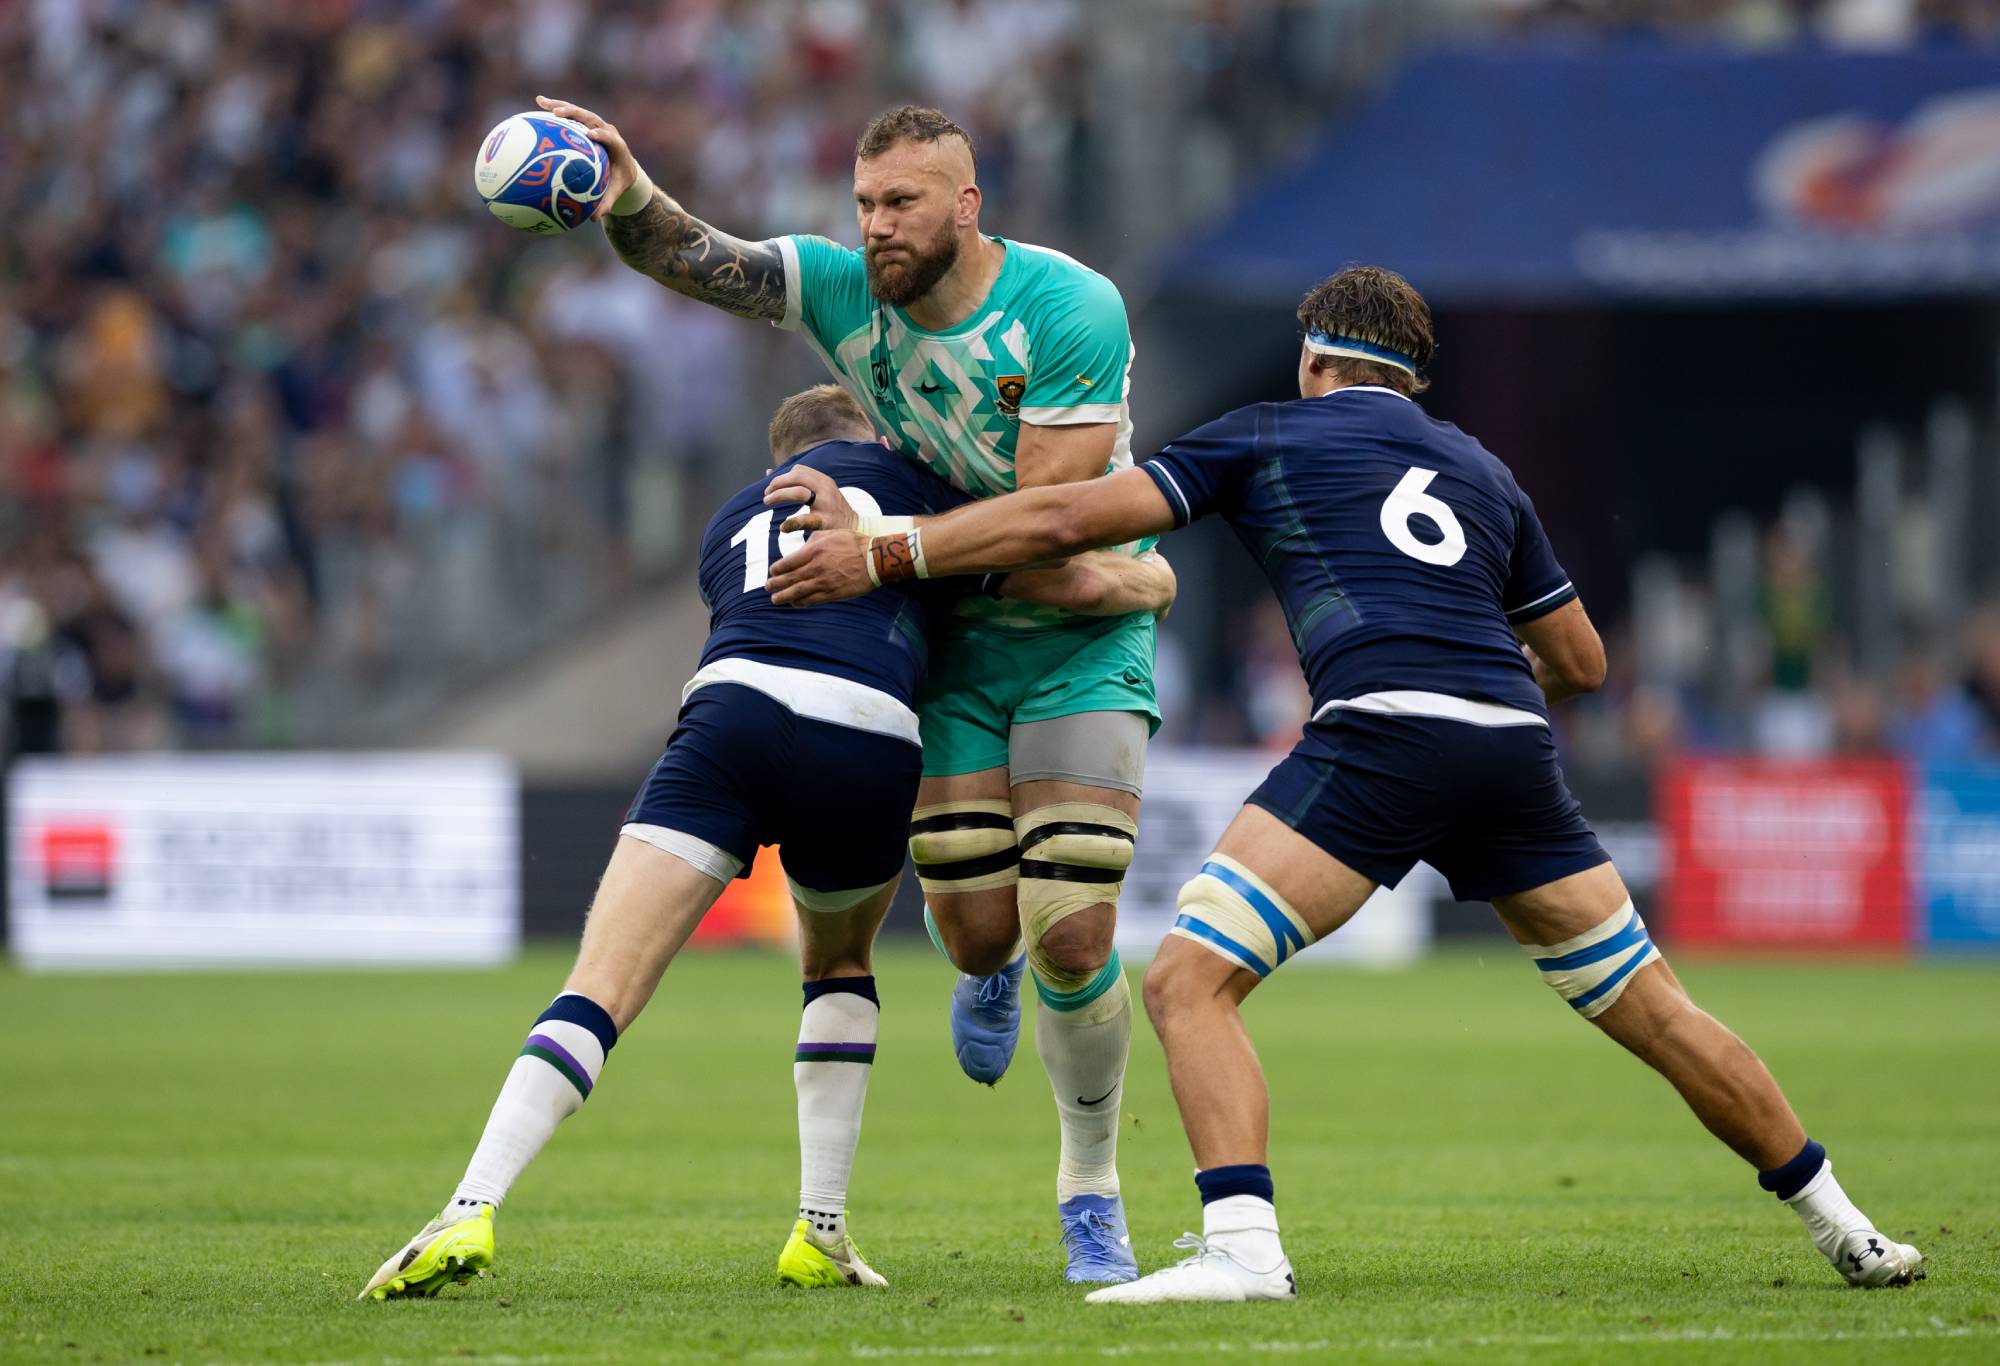 RG Snyman of South Africa passes the ball during the Rugby World Cup France 2023 match between South Africa and Scotland at Stade Velodrome on September 10, 2023 in Marseille, France. (Photo by Gaspafotos/MB Media/Getty Images)